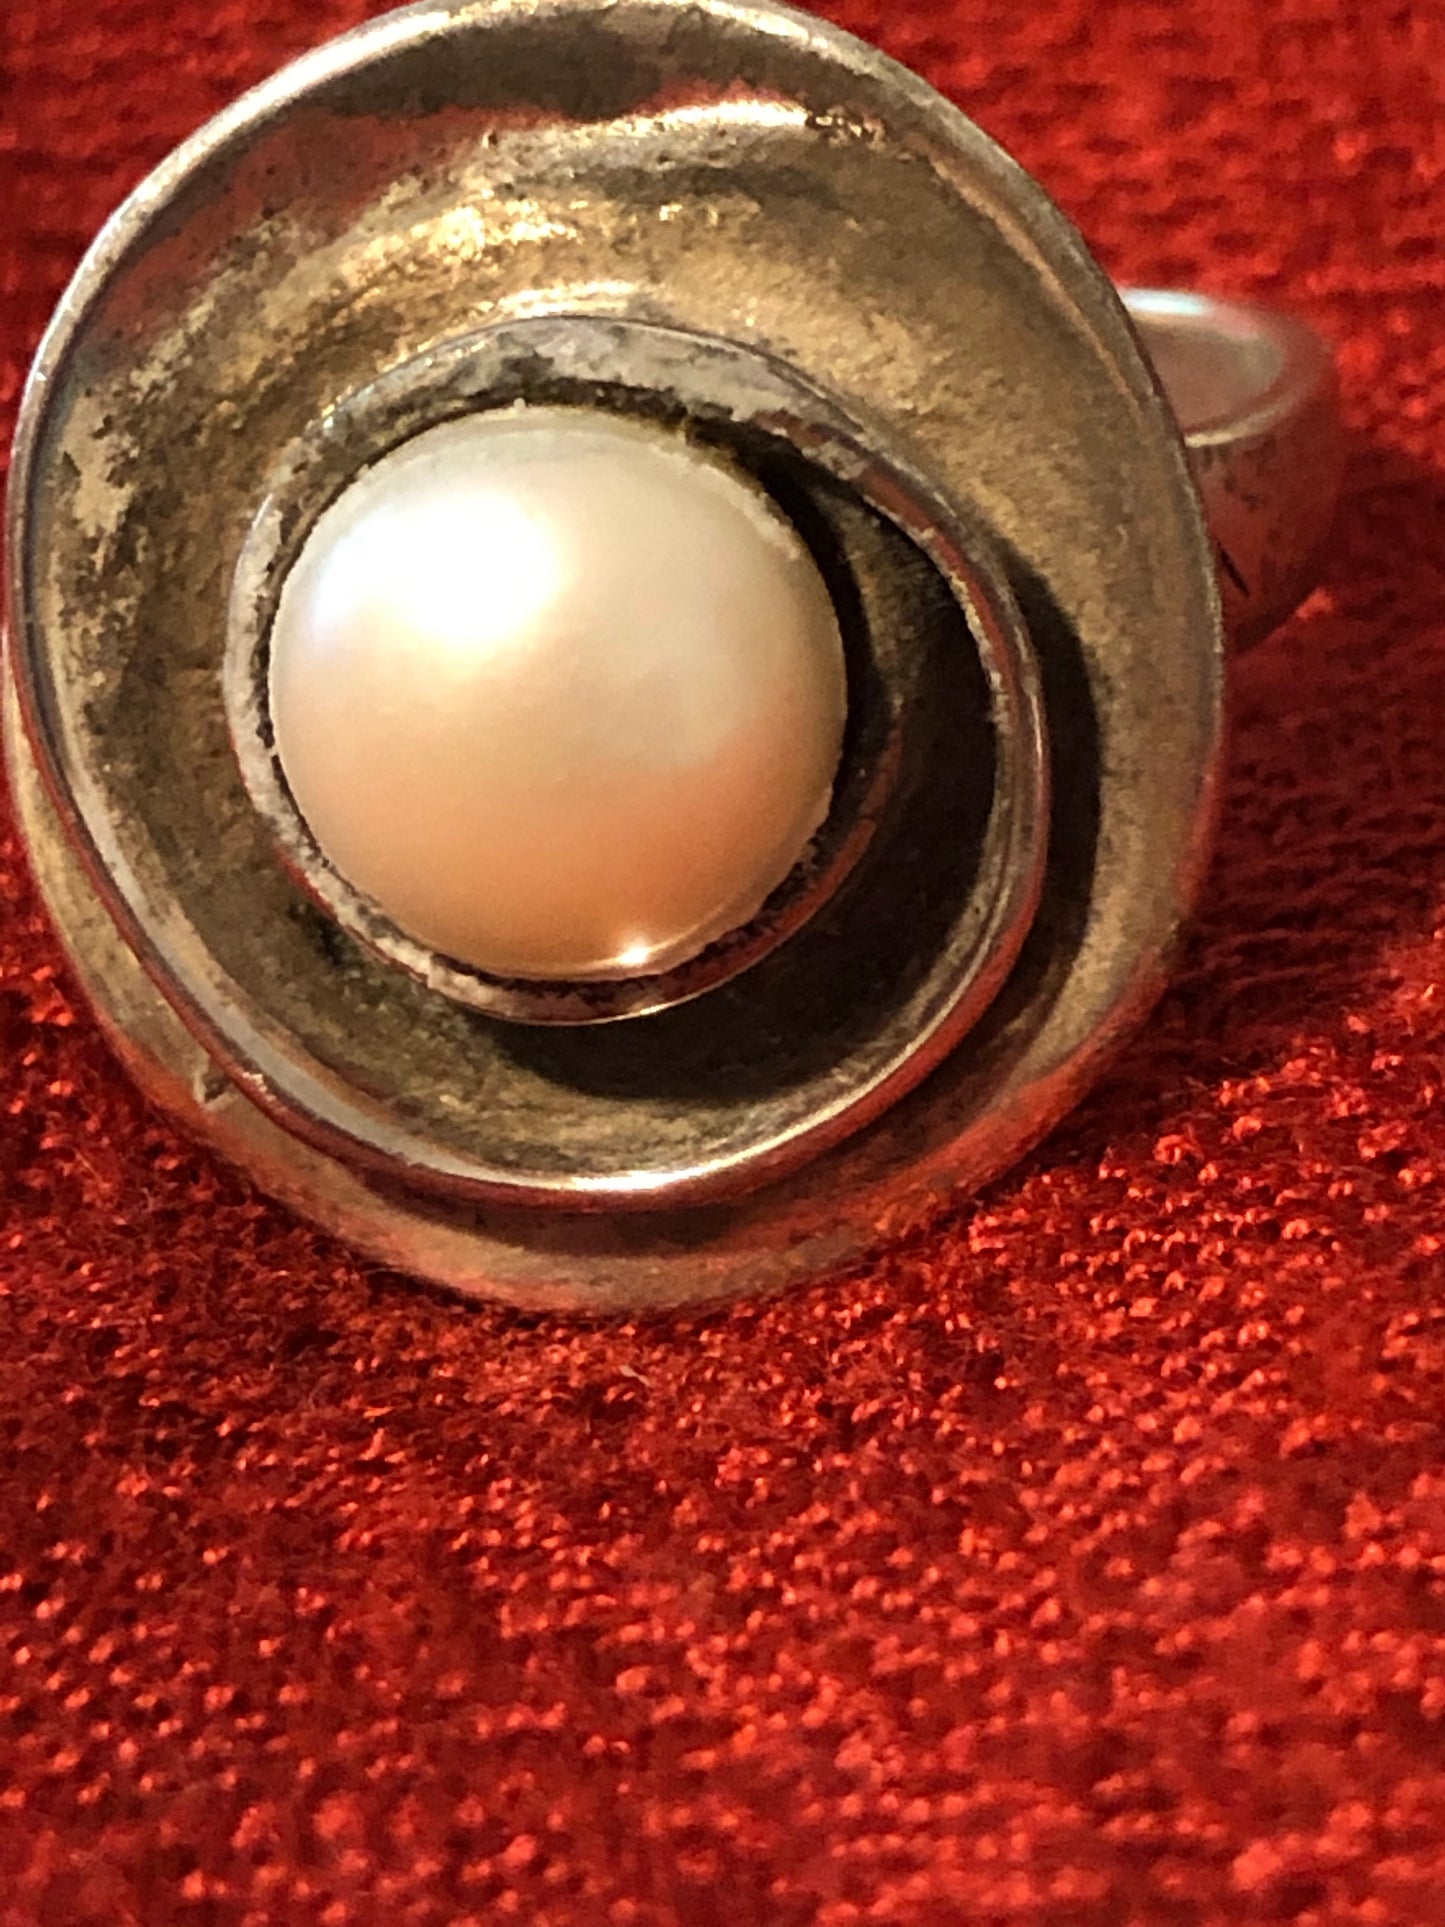 Sterling and Genuine Pearl Fashion Ring